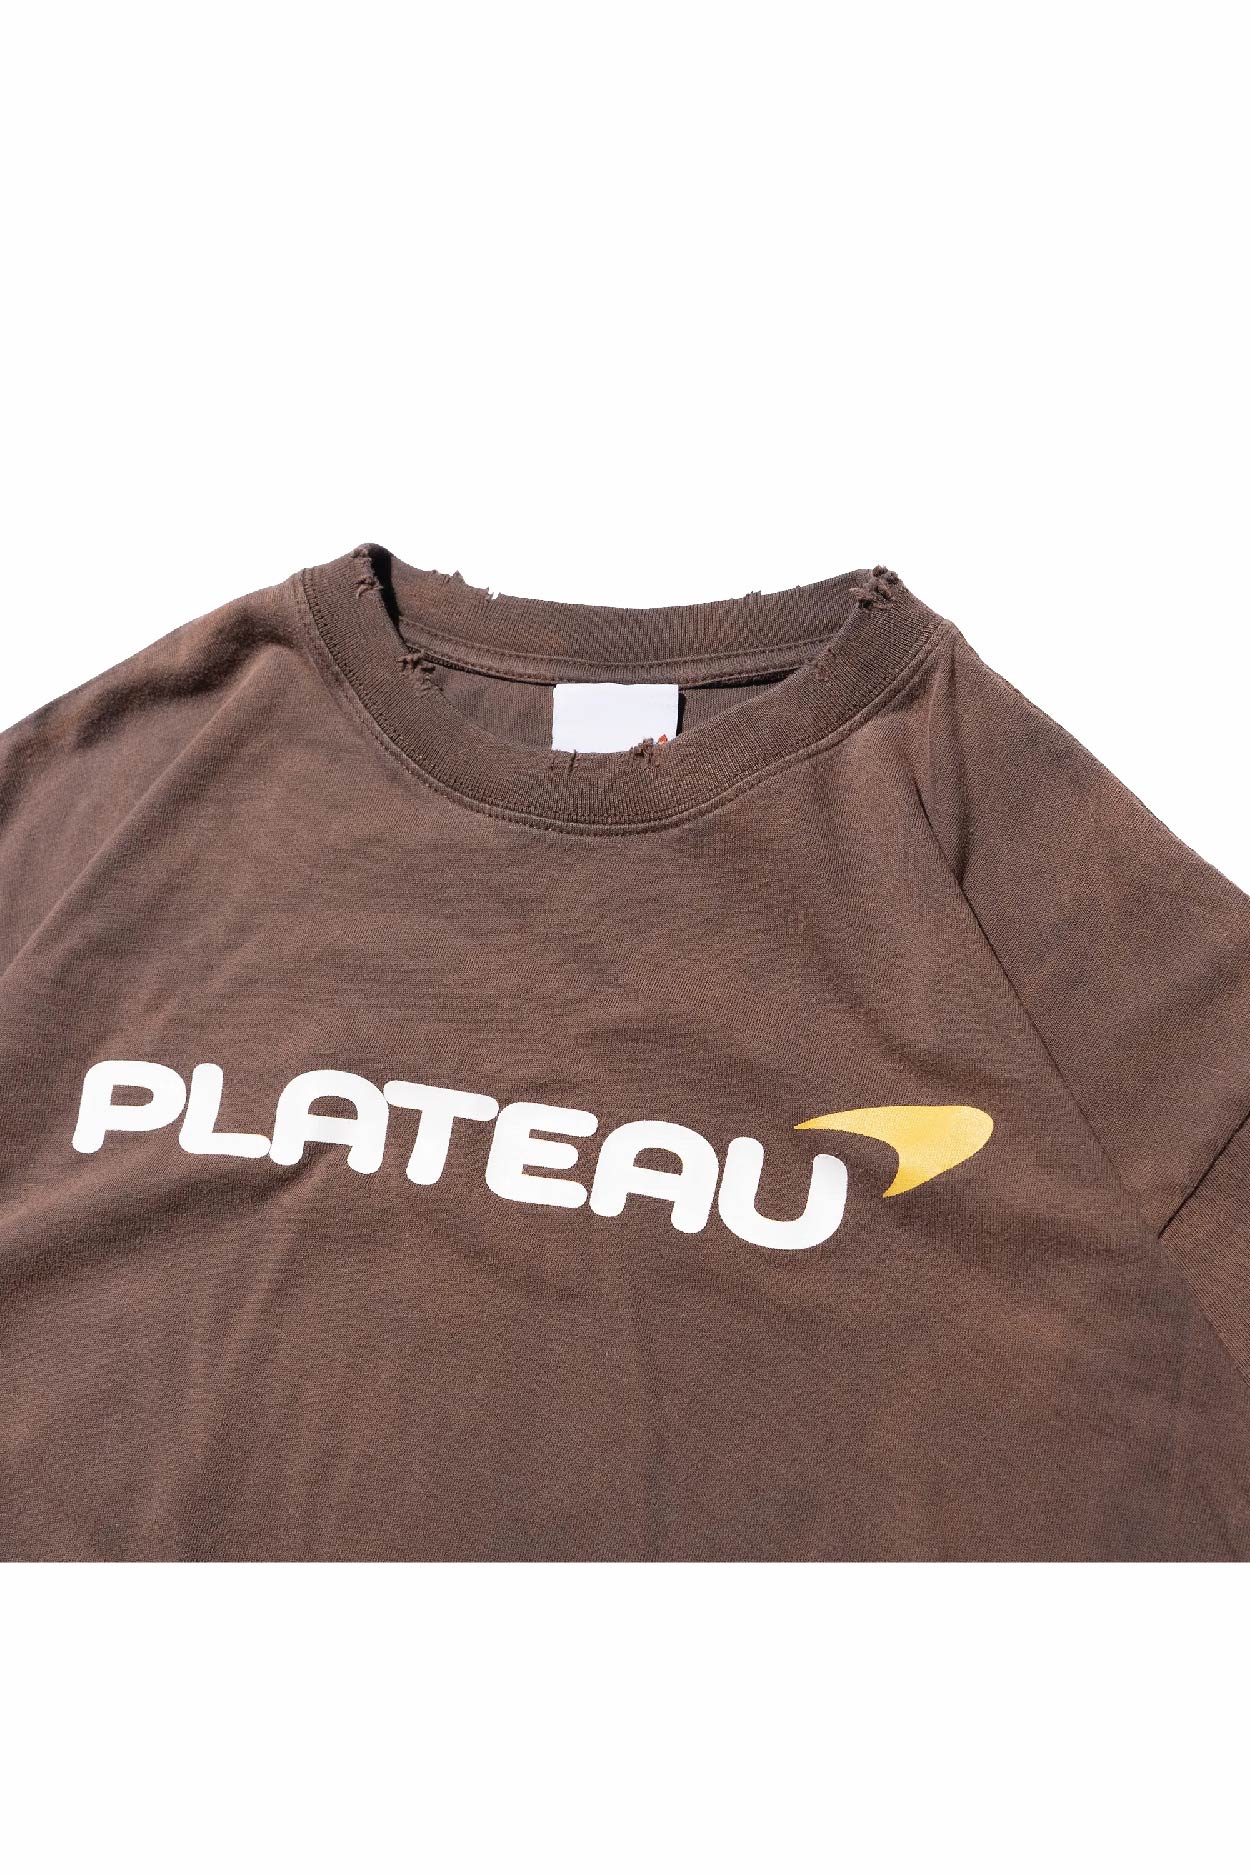 Washed Tee-01 Brown